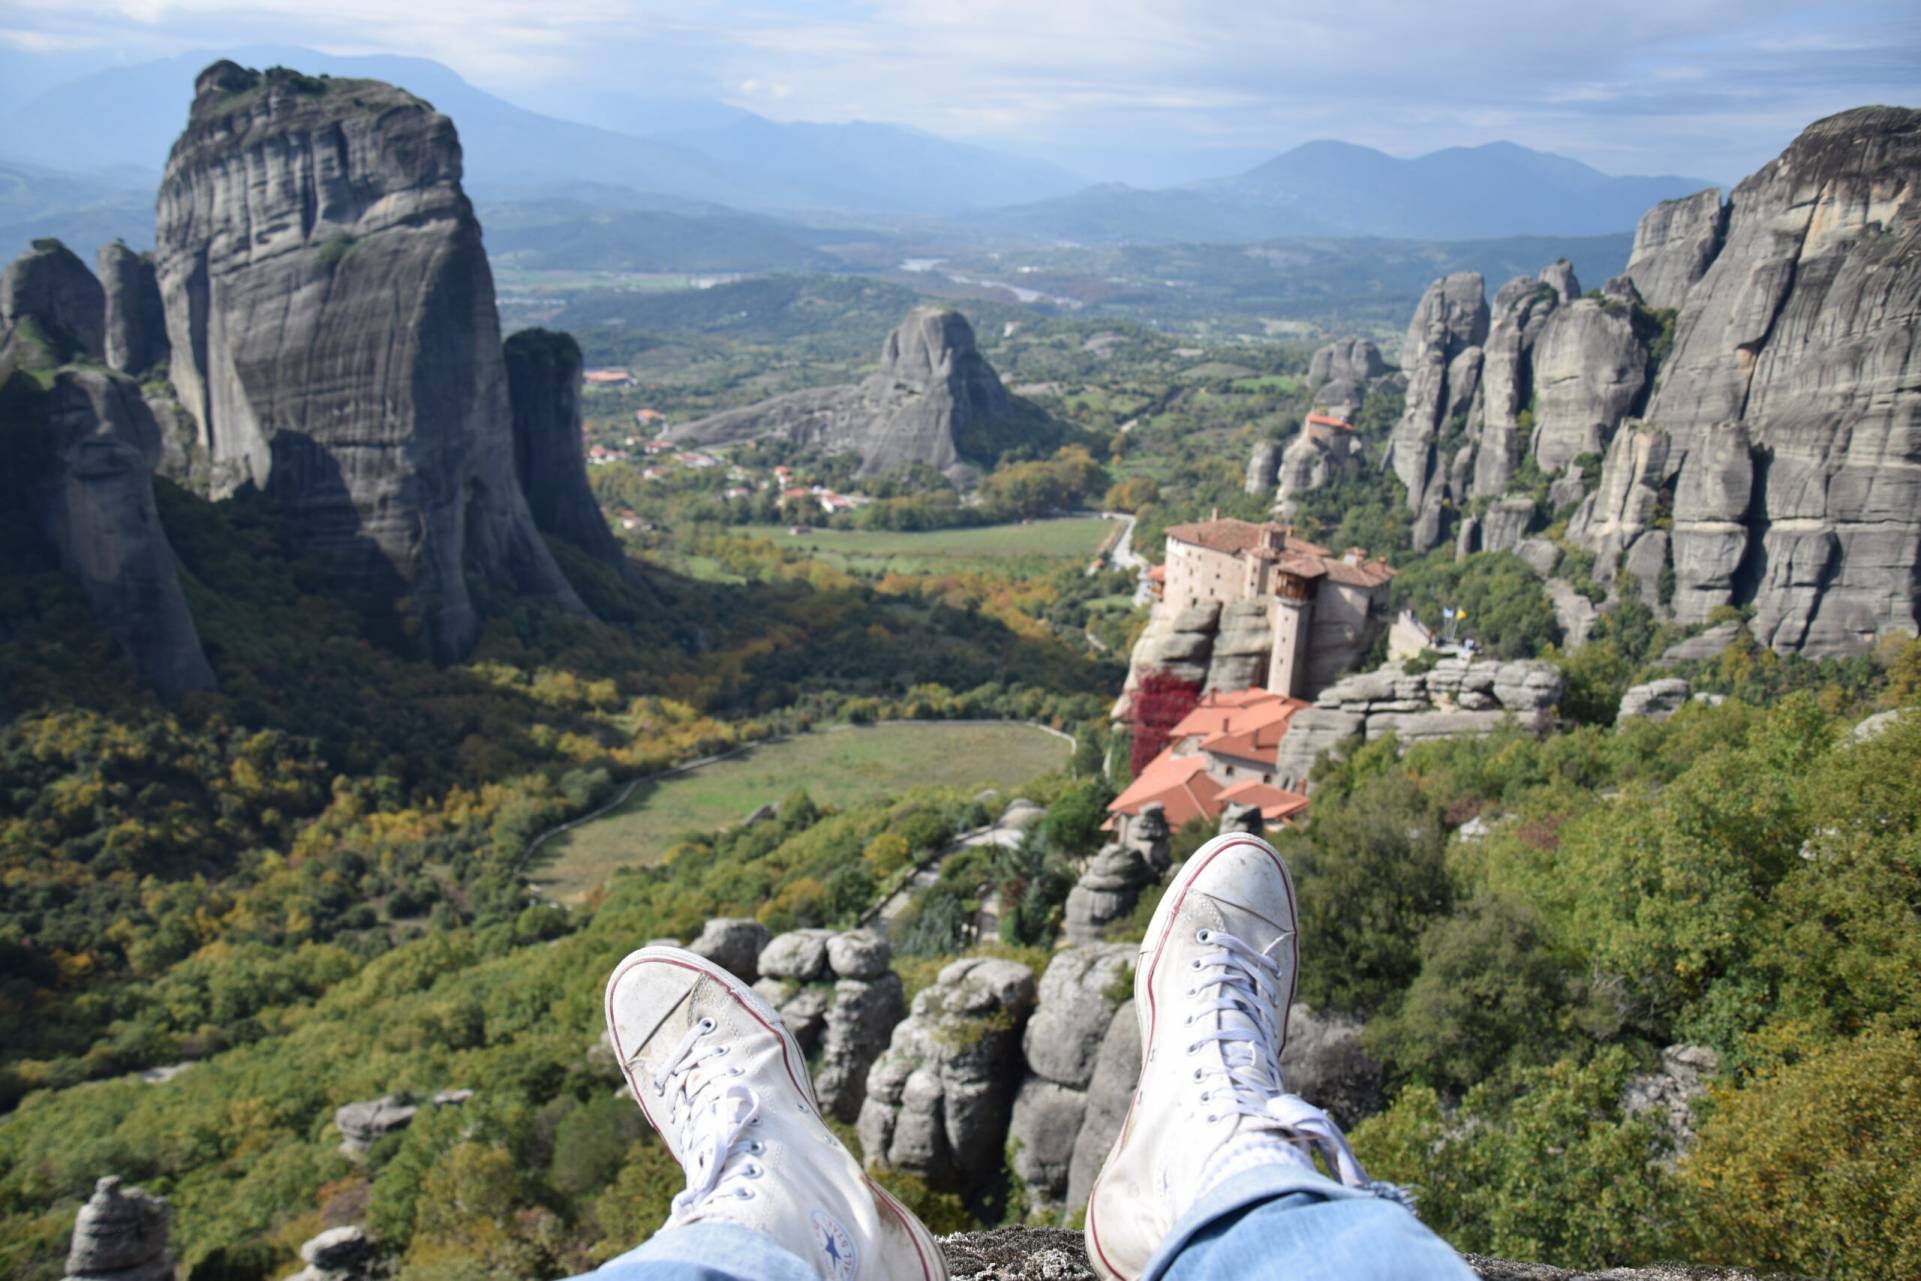 CYA - College Year in Athens 4. CYA Student Justin Brendel took this photo on the gorgeous site of Meteora scaled